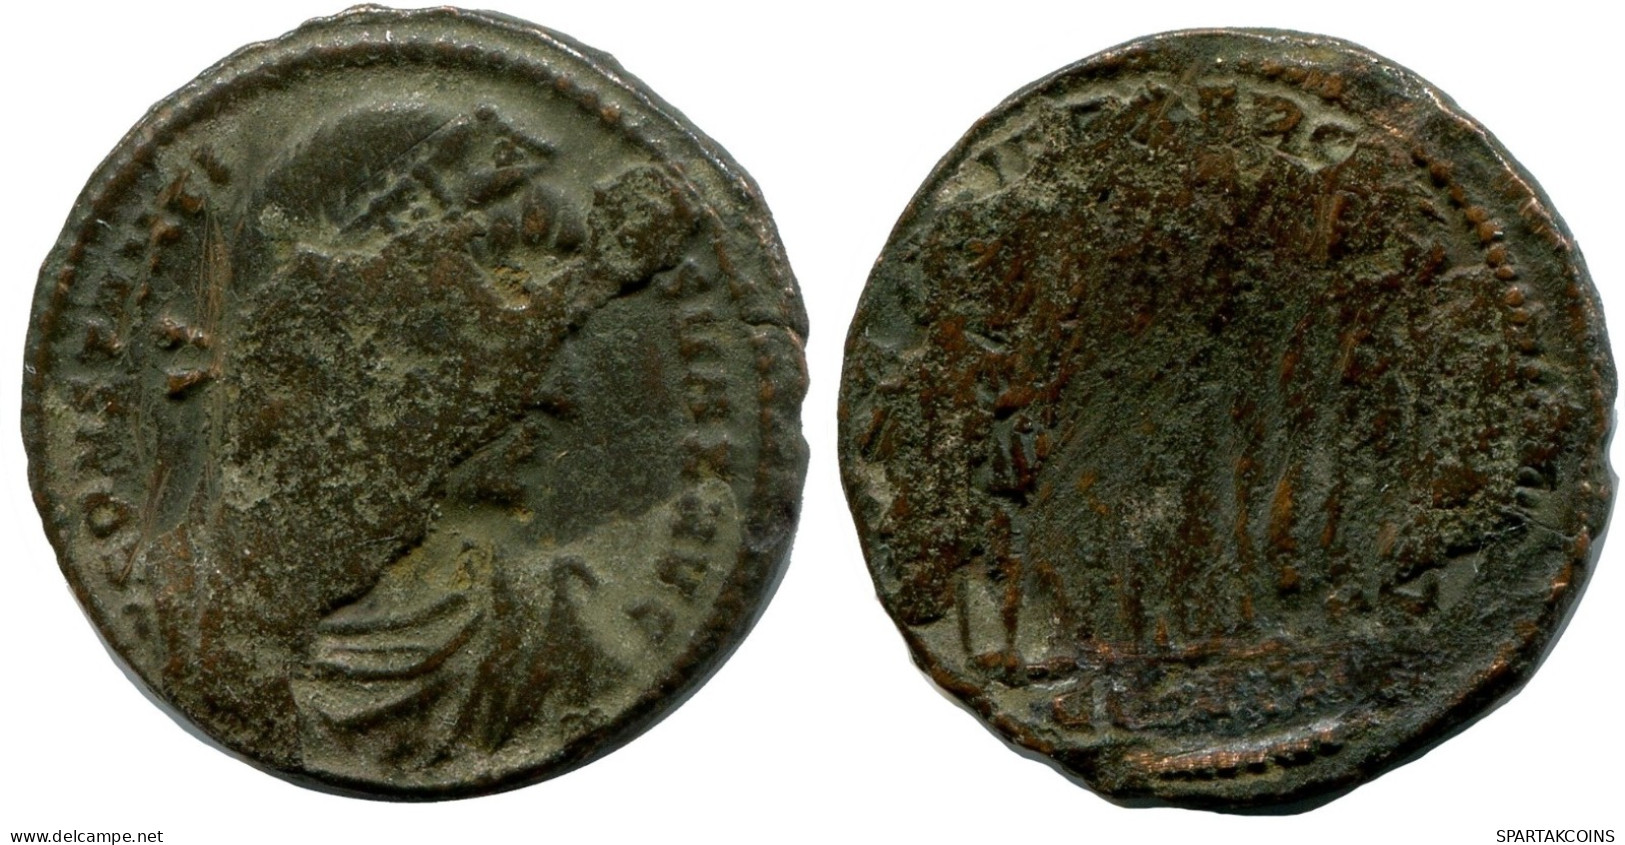 CONSTANTINE I CONSTANTINOPLE FROM THE ROYAL ONTARIO MUSEUM #ANC10794.14.U.A - The Christian Empire (307 AD To 363 AD)